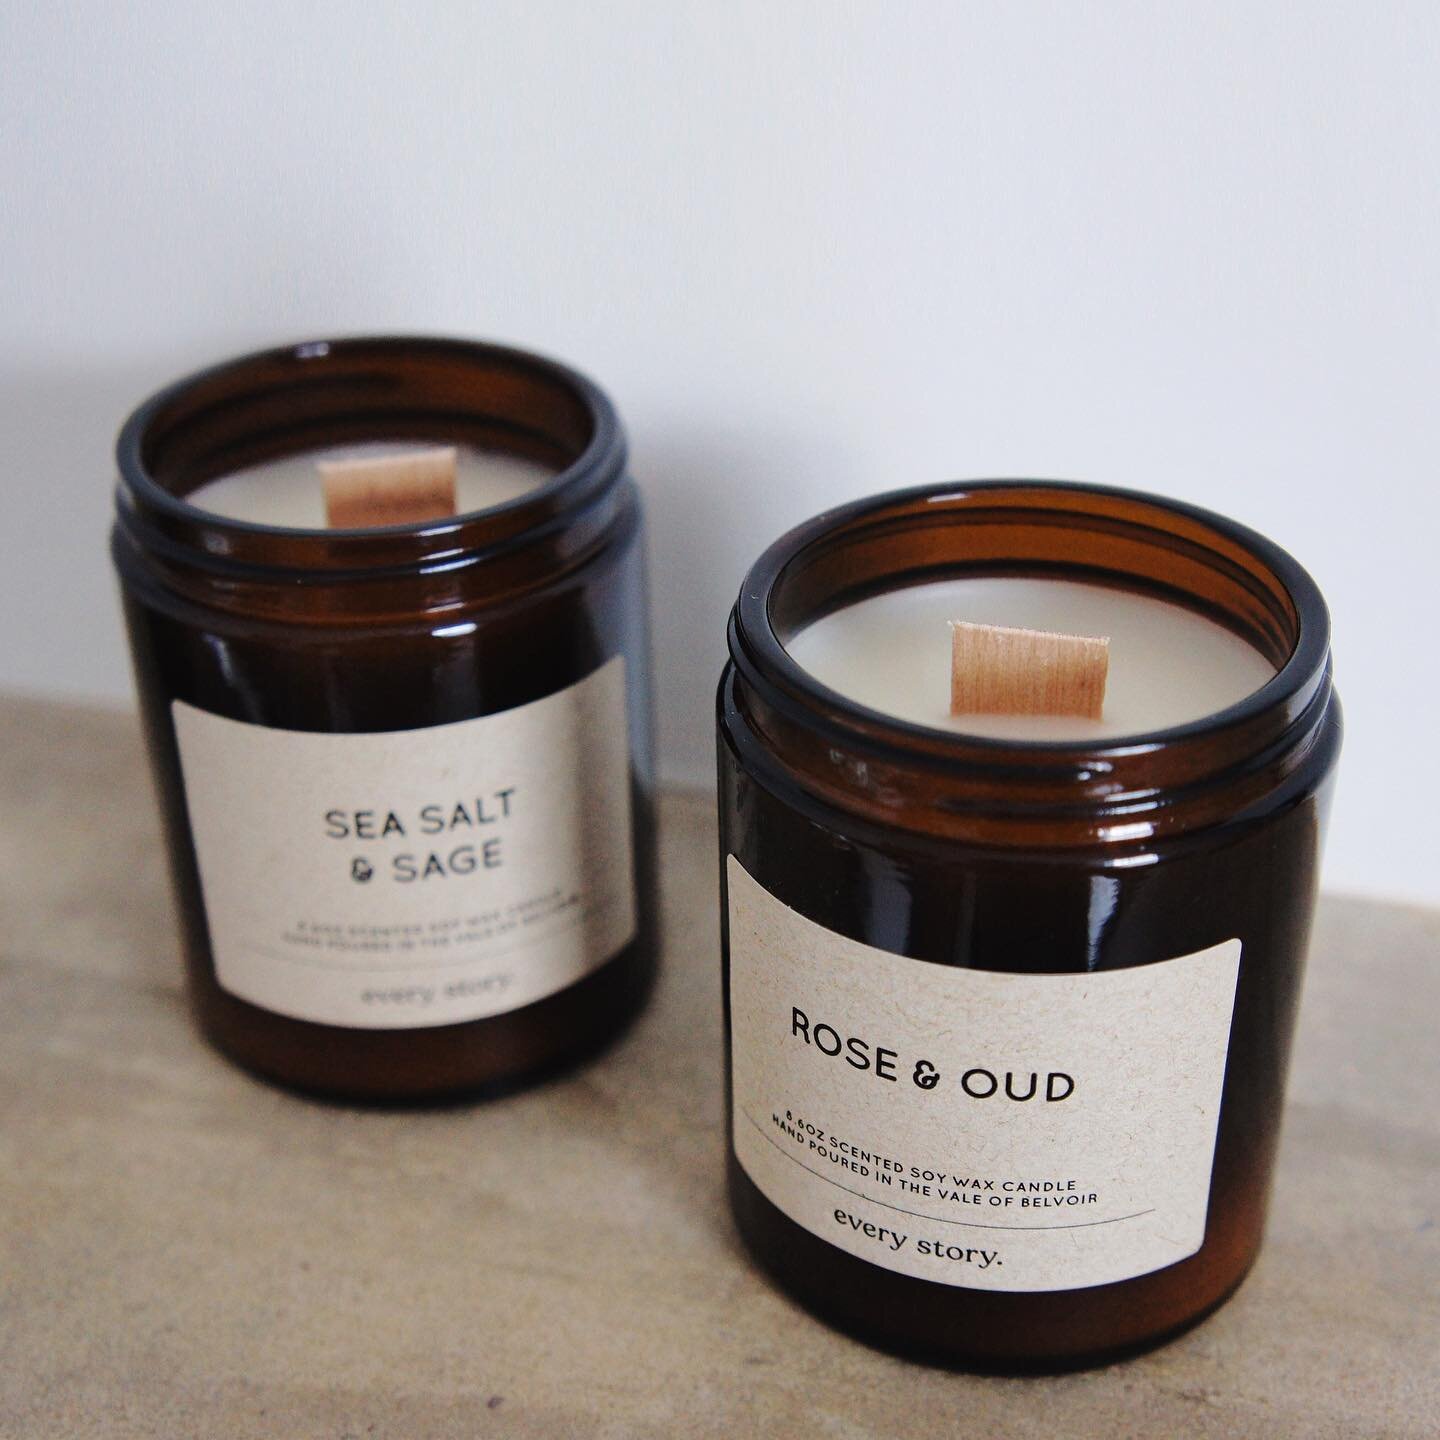 Thank you to everyone who purchased our candles, handmade by @every__story.  They are now sold out. 💖

It is so nice to see so many of you supporting small businesses. 🎉

Hoping to restock soon. 🙌🏼